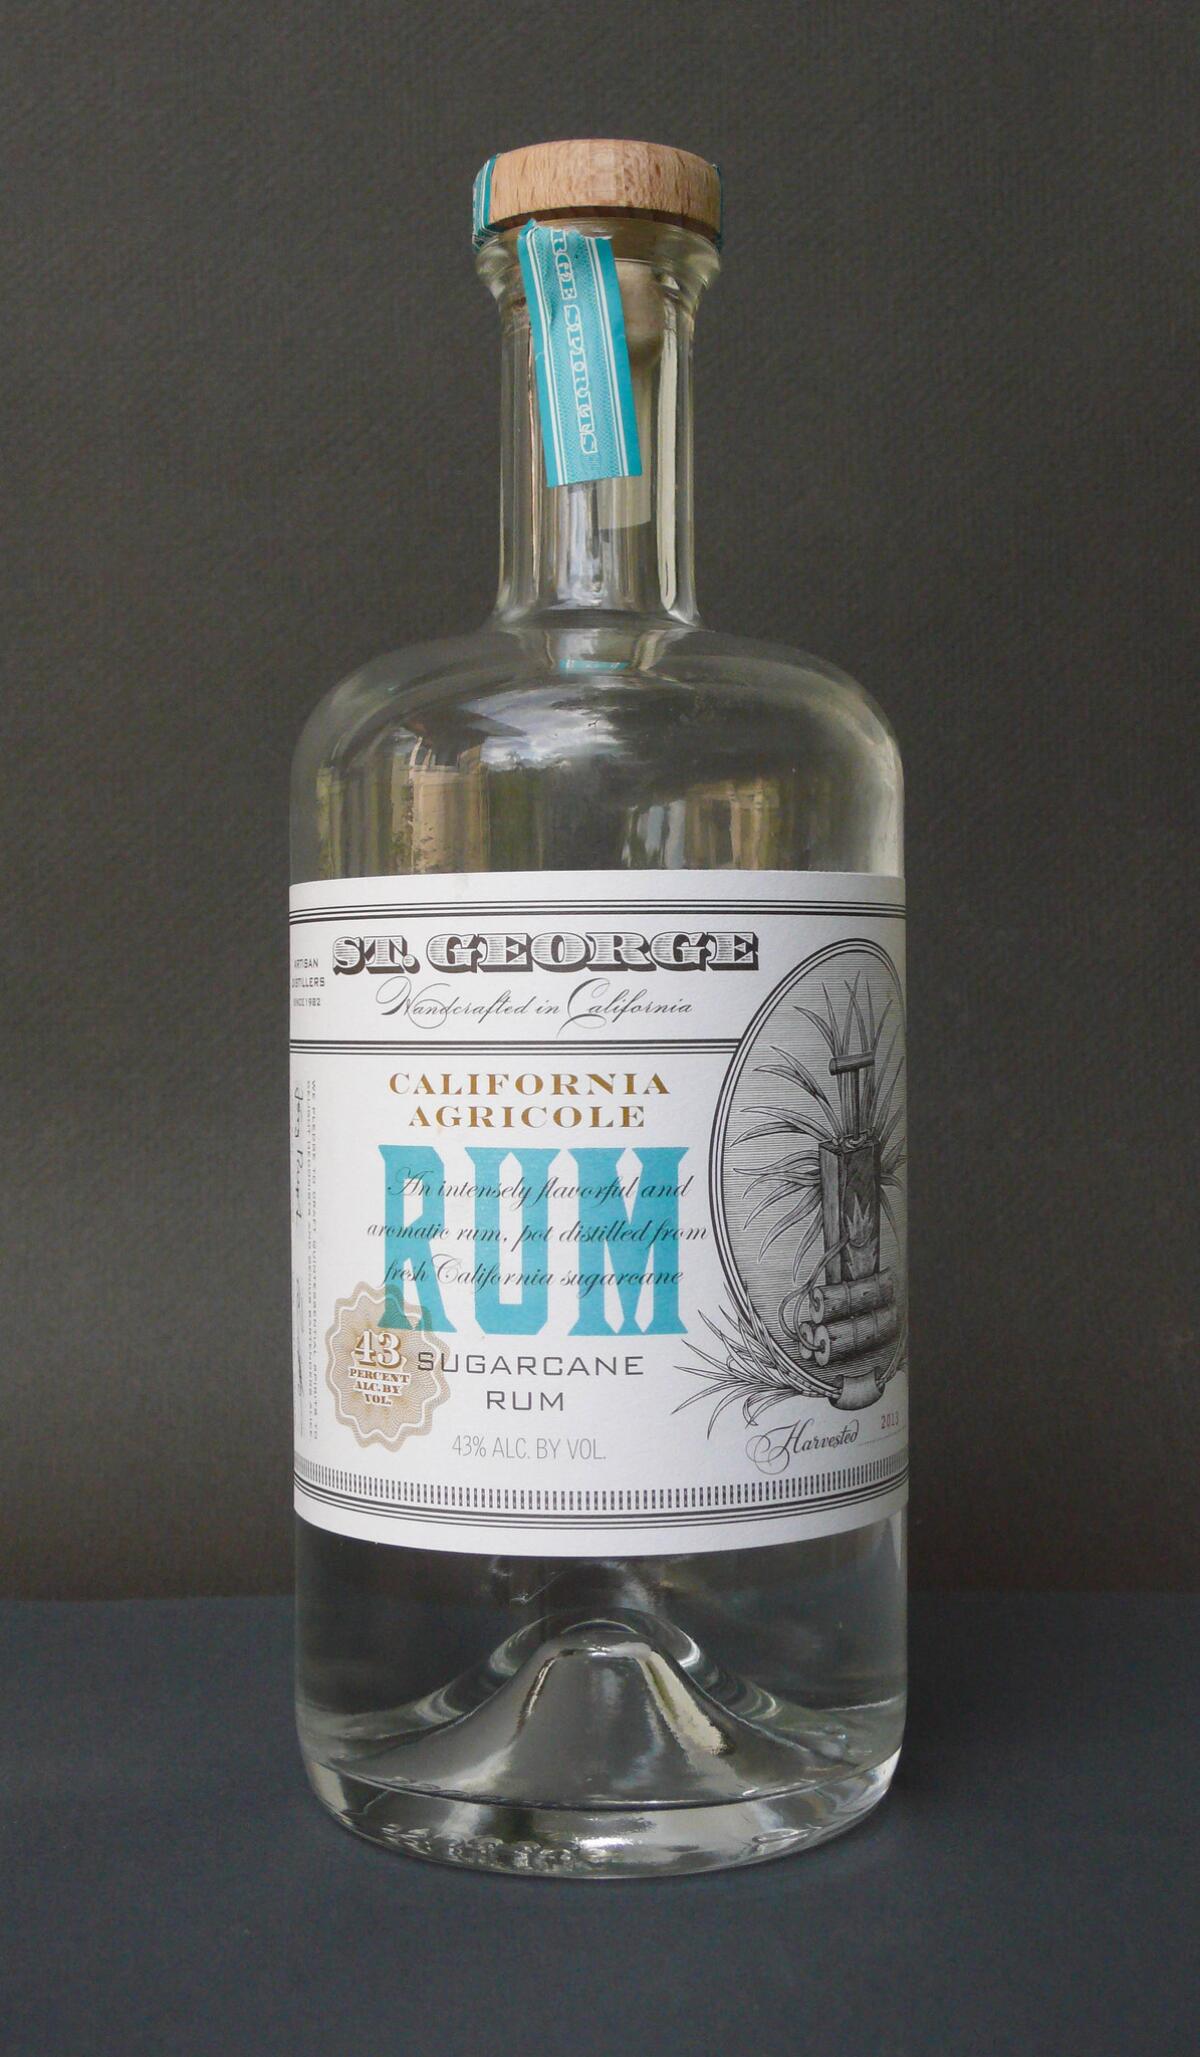 St. George California Agricole Rum is made from sugar cane grown in the Imperial Valley and distilled in a 500-liter copper still by St. George Spirits in Alameda.